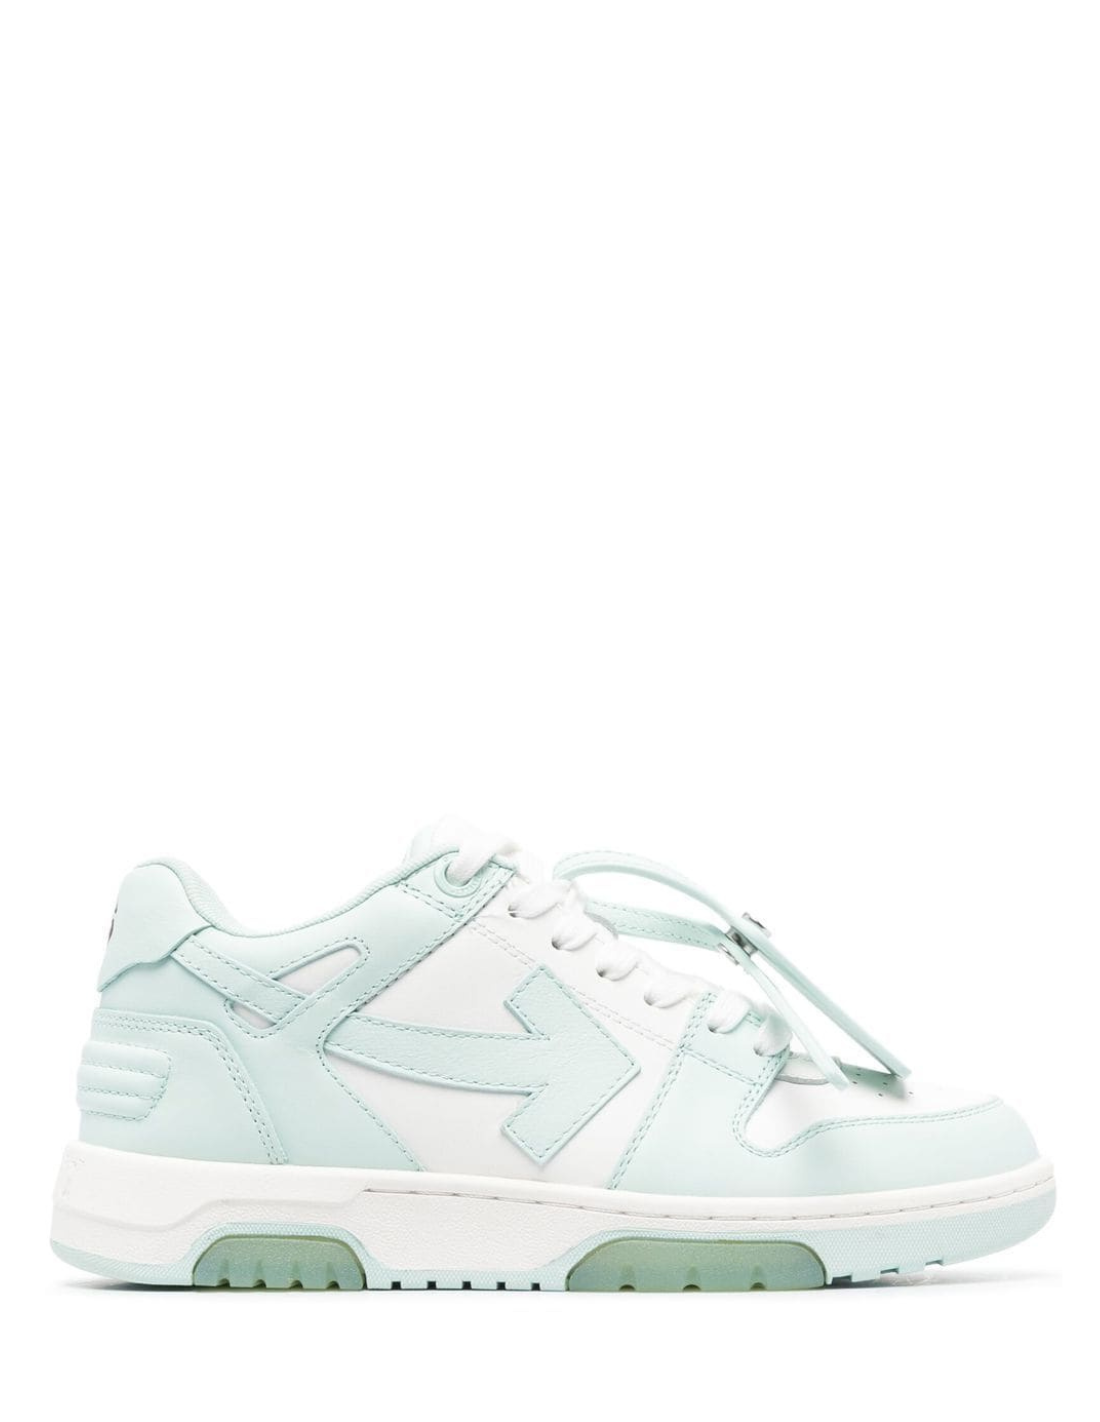 Påstået høste matron Off-White "Out of Office" low top sneakers - mint white